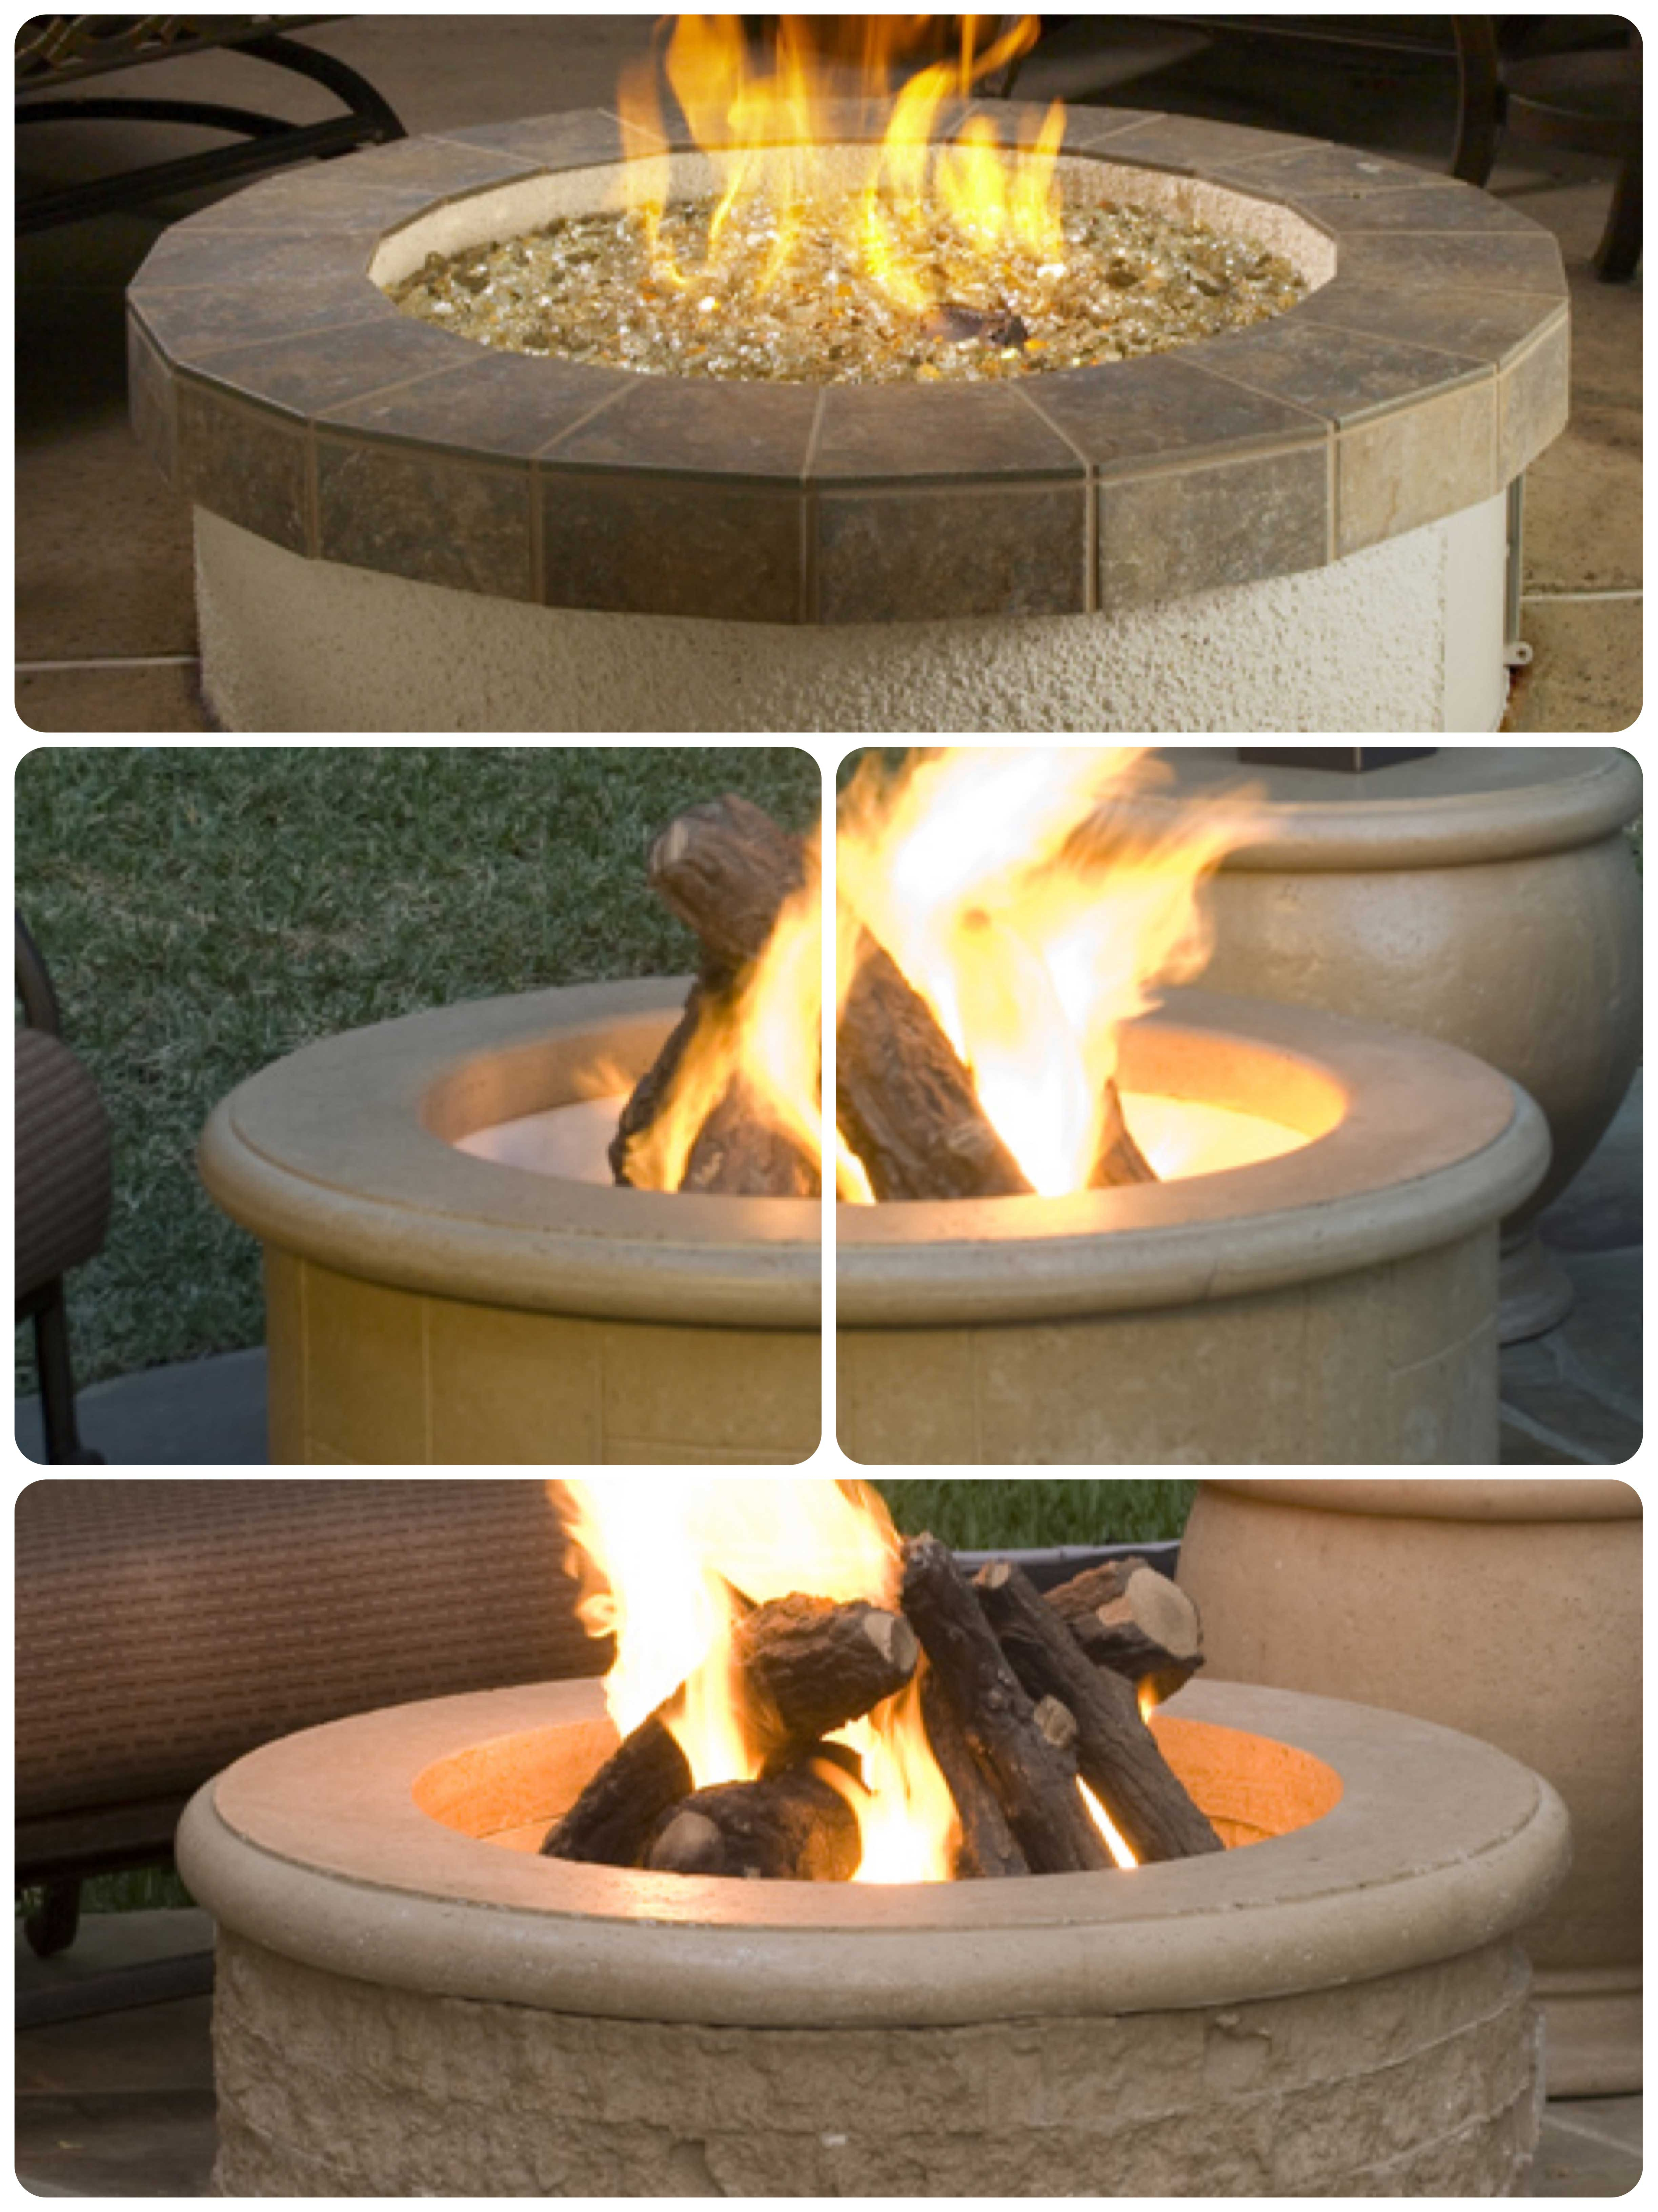 Outdoor Elegance Patio Design Center Fireplace Designs Fireside intended for sizing 4892 X 6528